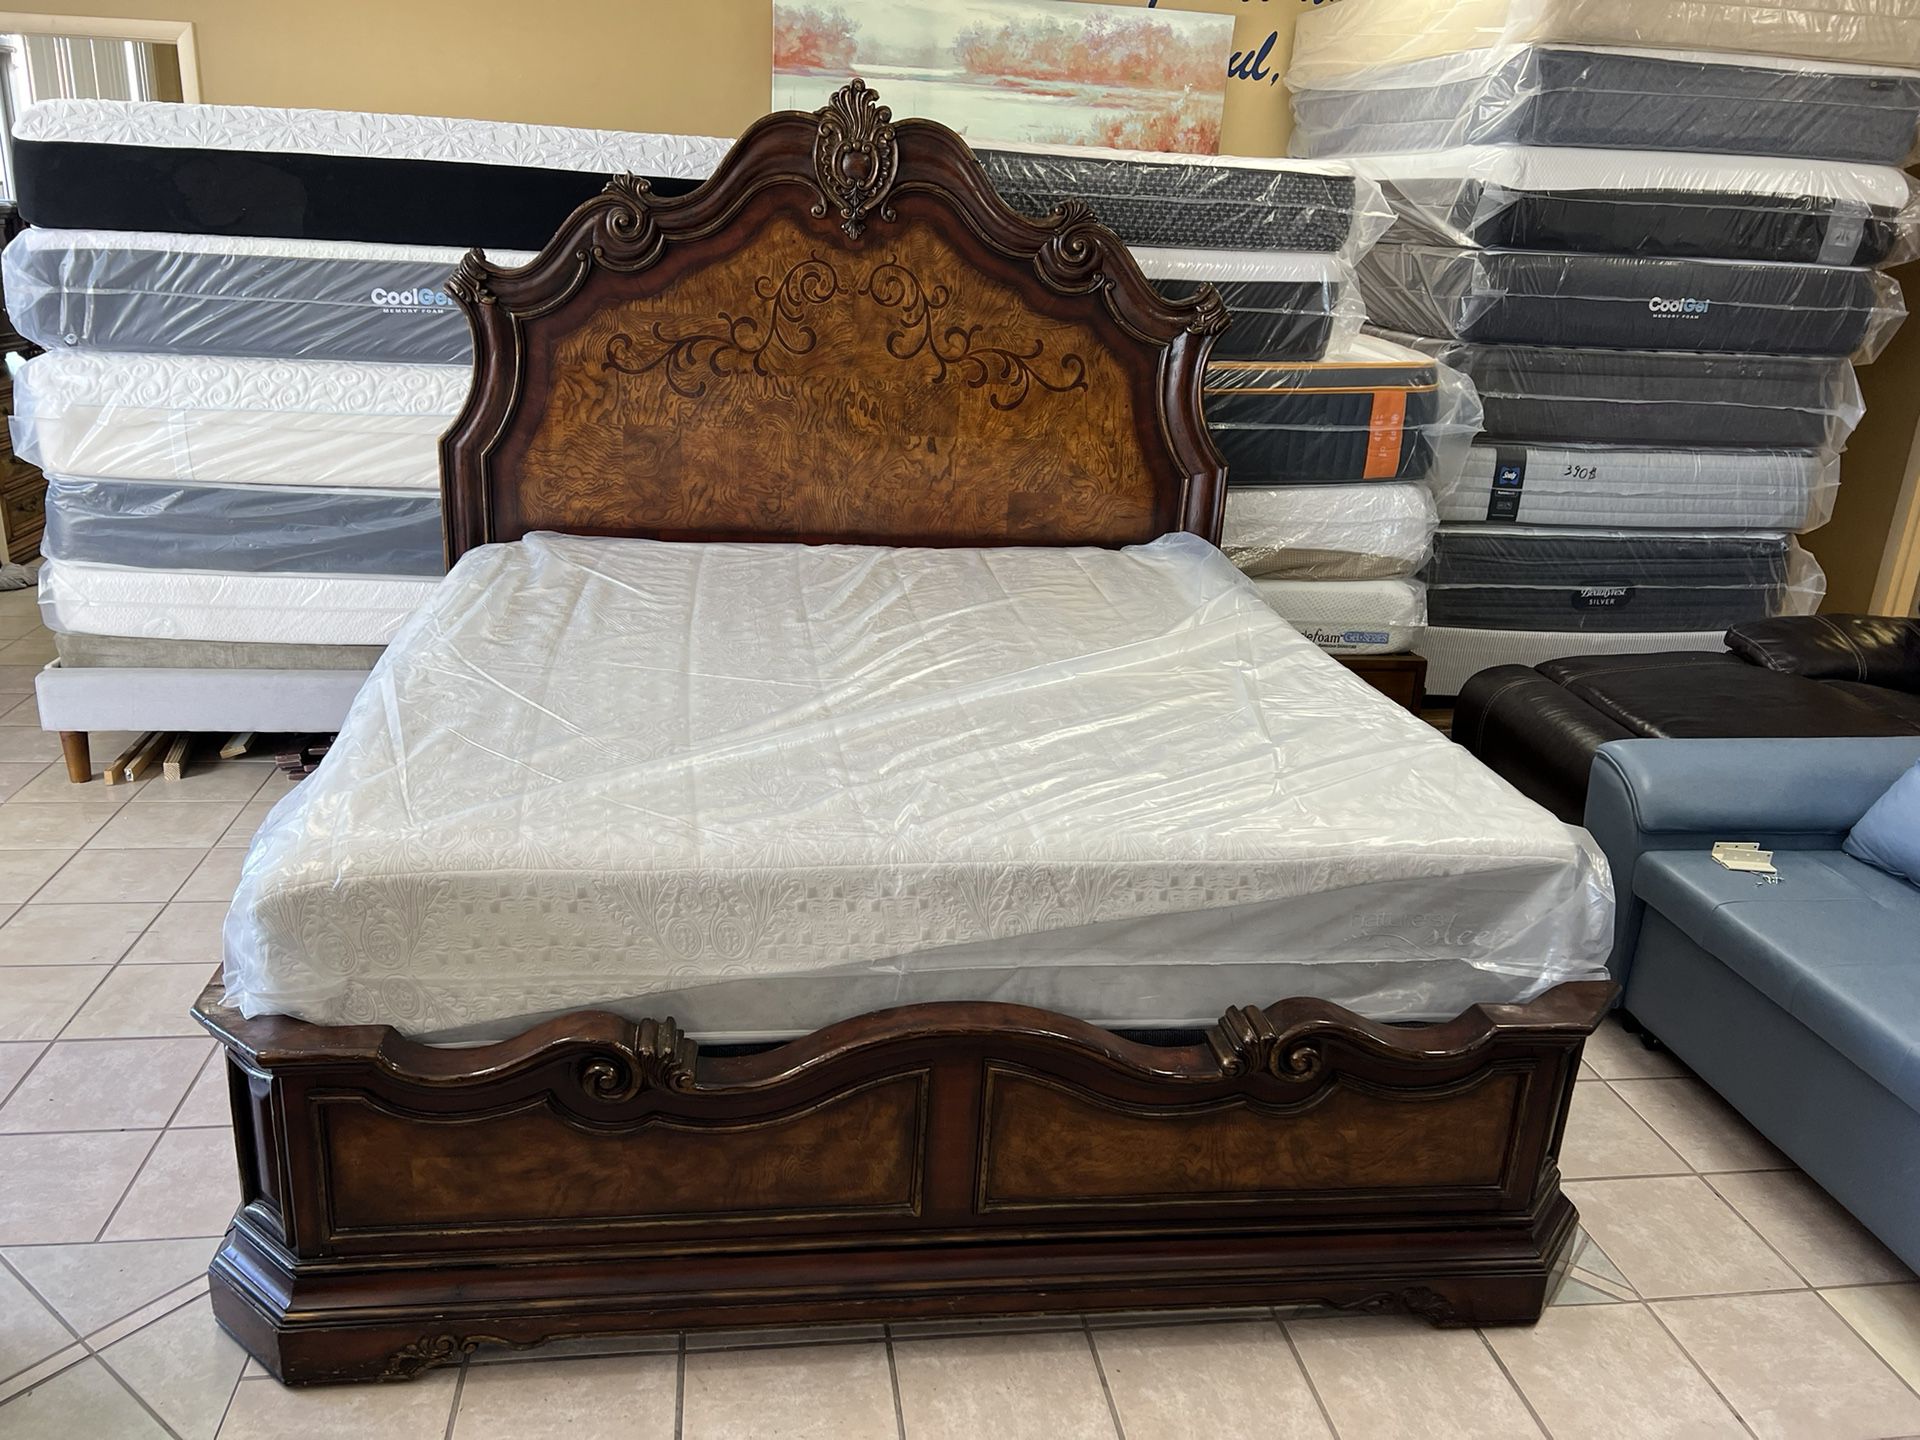 King Size Bed Mattress, And Boxspring Included🚚🚚 Free Delivery🚚🚚